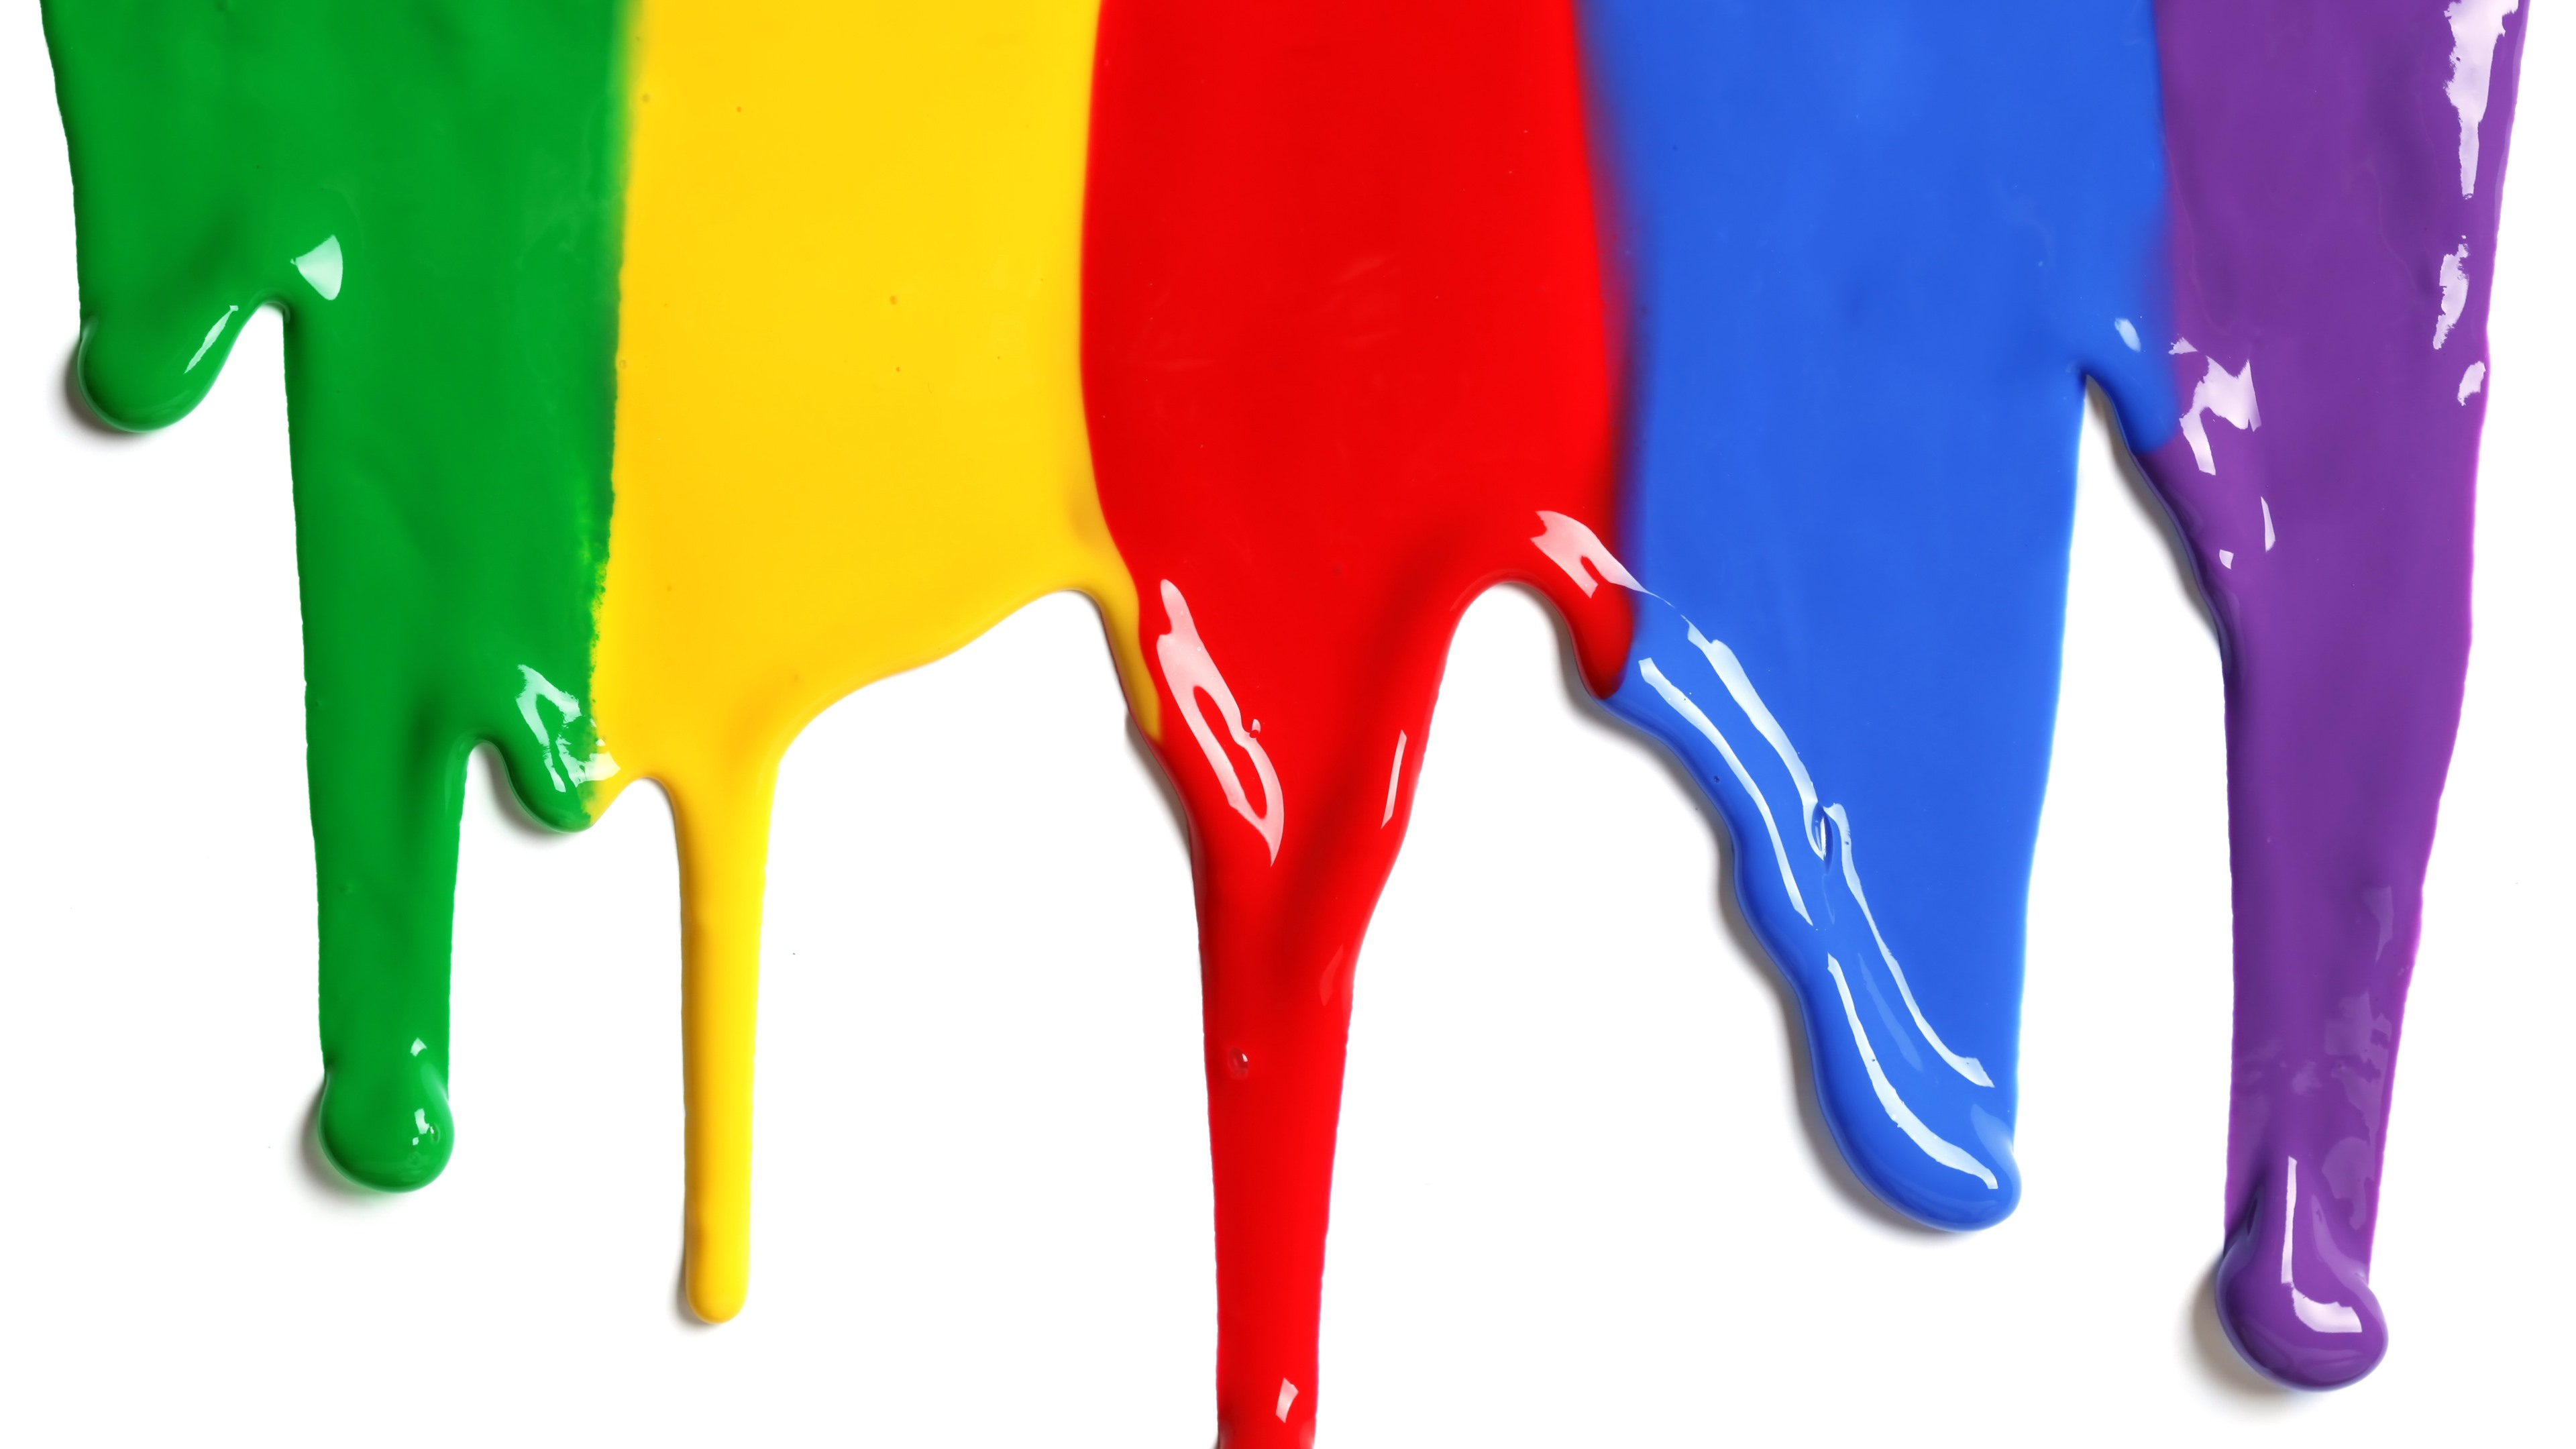 Wallpaper Colorful paint, rainbow color, white background 5120x2880 UHD 5K Picture, Image